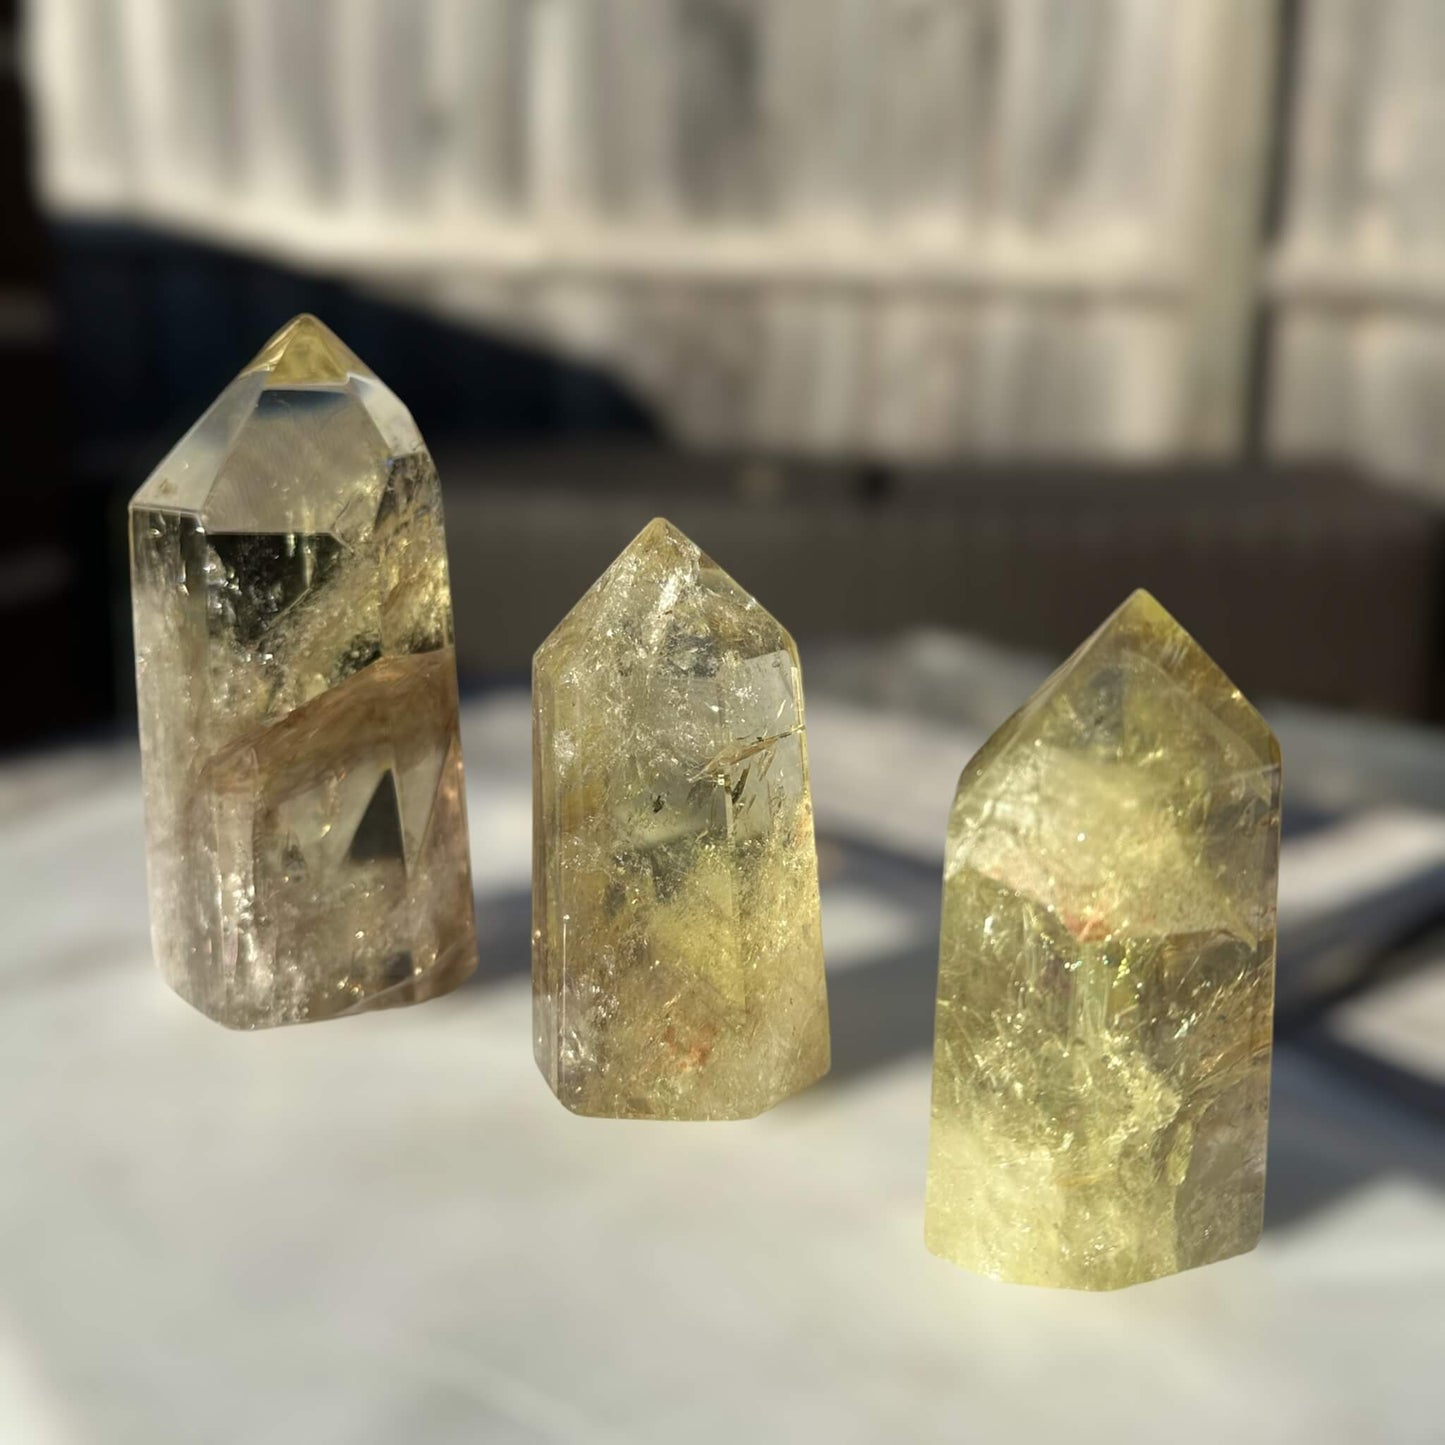 Three Lemon Smoky Quartz Crystal Generators - varying in sizes of 10cm, 7.5cm and 7.3cm high. Each crystal exhibits unique formations and shades, creating a captivating display.